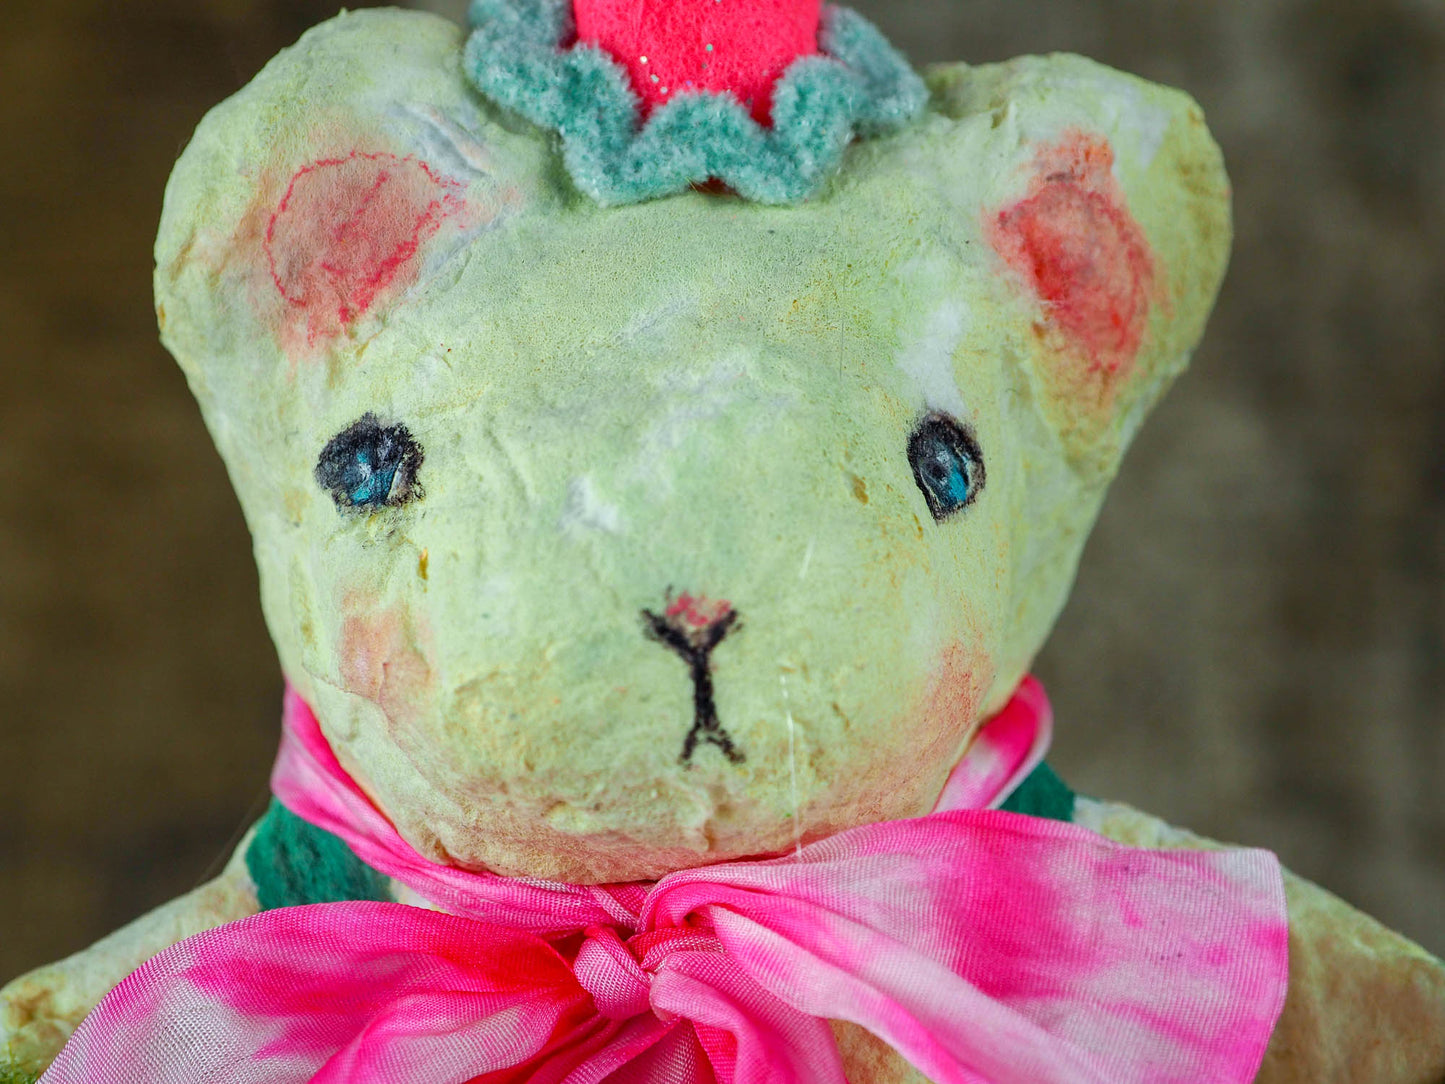 Spring always inspires Danita to make beautiful handmade decorations for when the flowers start to bloom, just like this 10" spun cotton handmade Easter bear art doll by Danita, hand painted and dressed in a blue polka dot suit.